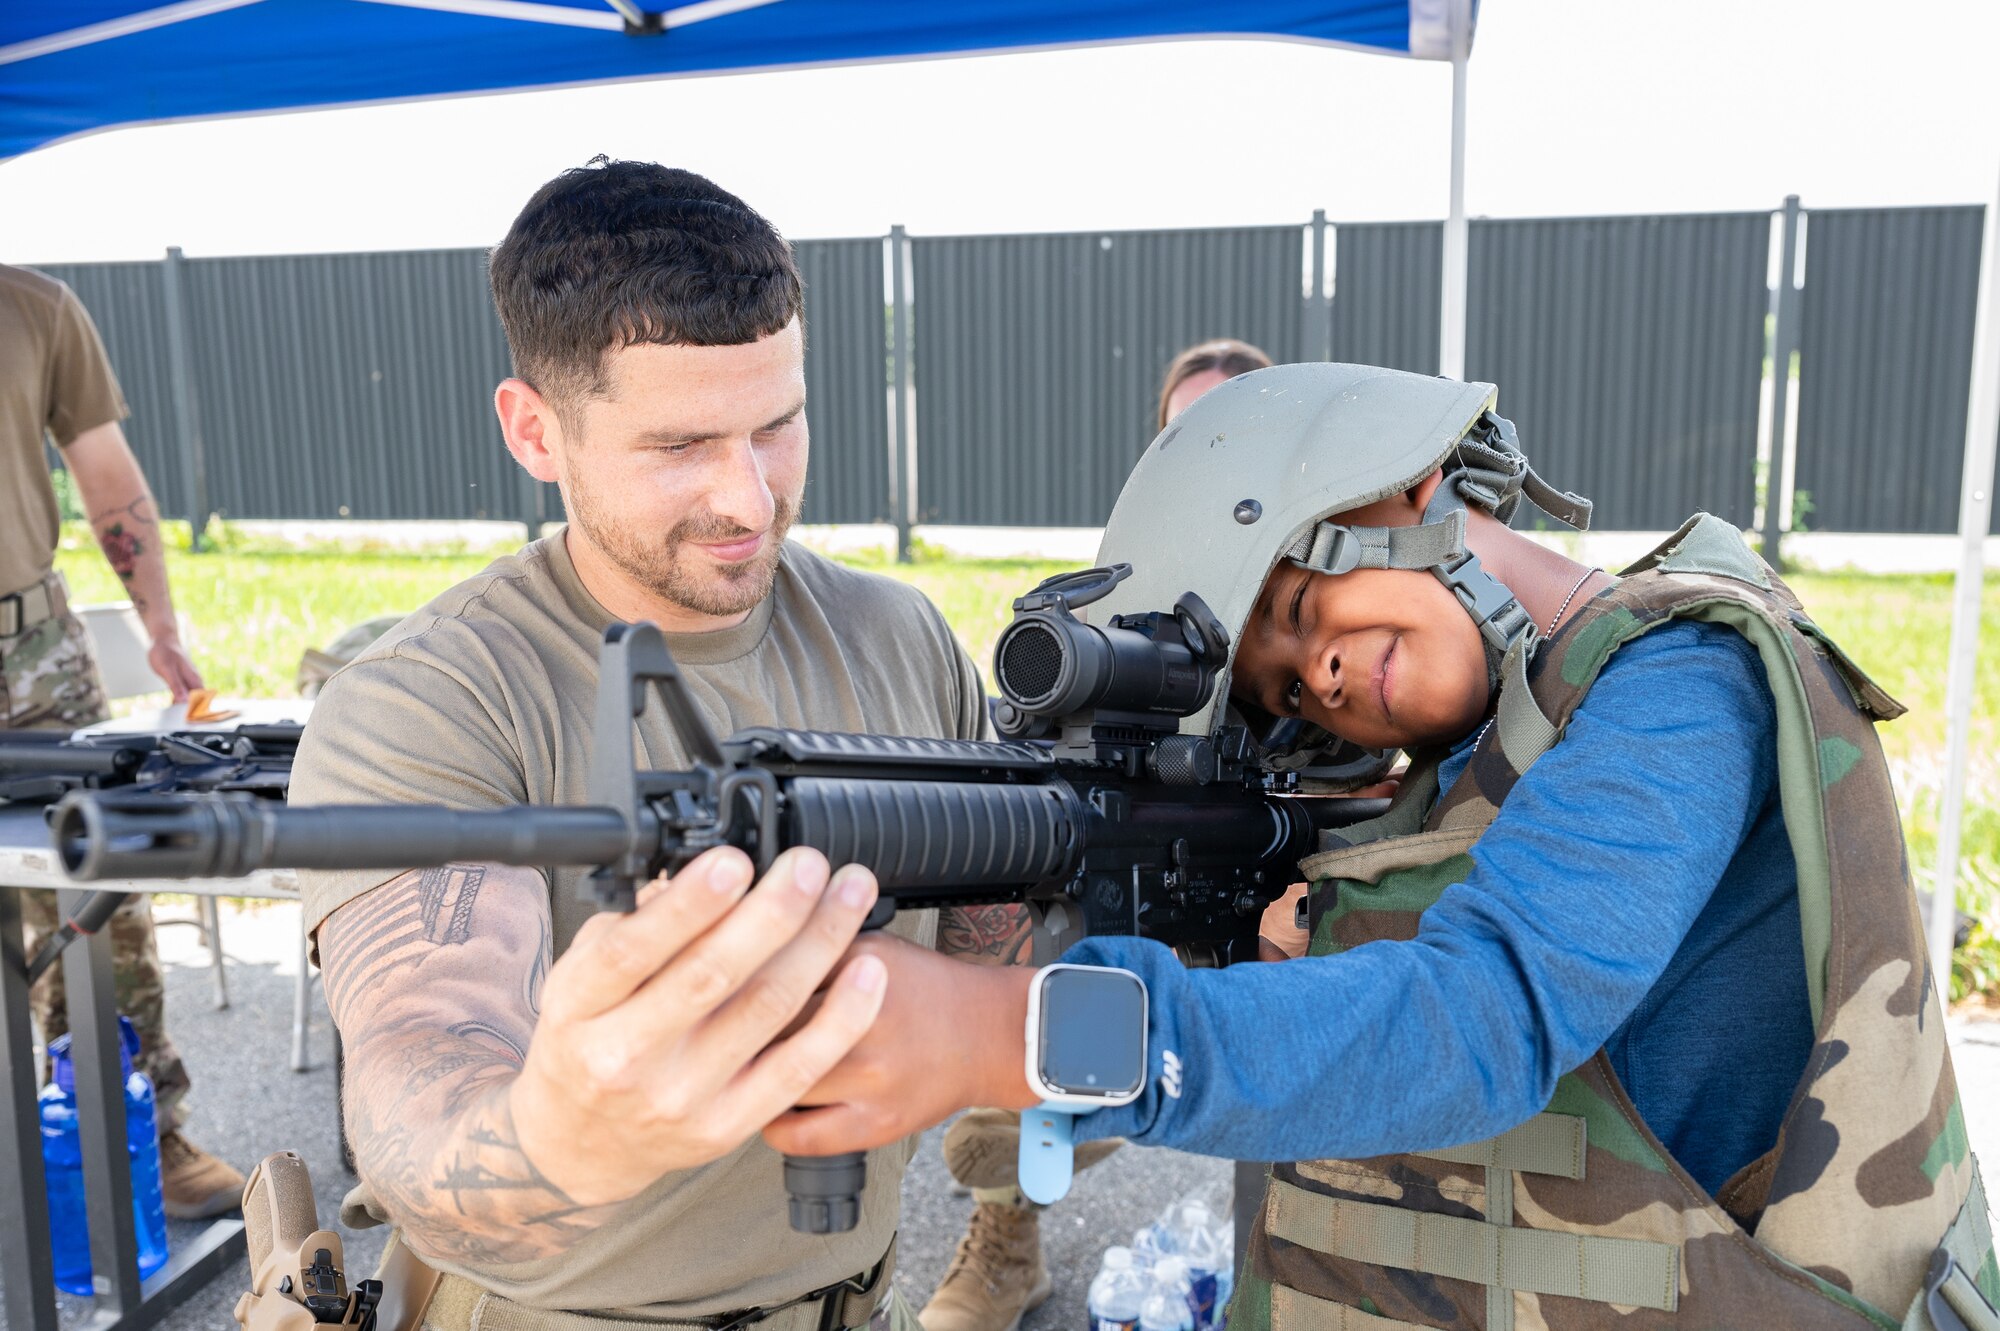 Staff Sgt. Ryan Dearborn, 436th Security Forces Squadron combat arms instructor, shows Zaire Thomas how to aim an M4-A1 carbine during the 2022 Children’s Day Celebration at Dover Air Force Base, Delaware, June 13, 2022. This year’s celebration offered outdoor activities and a mock deployment line to Team Dover families. (U.S. Air Force photo by Mauricio Campino)